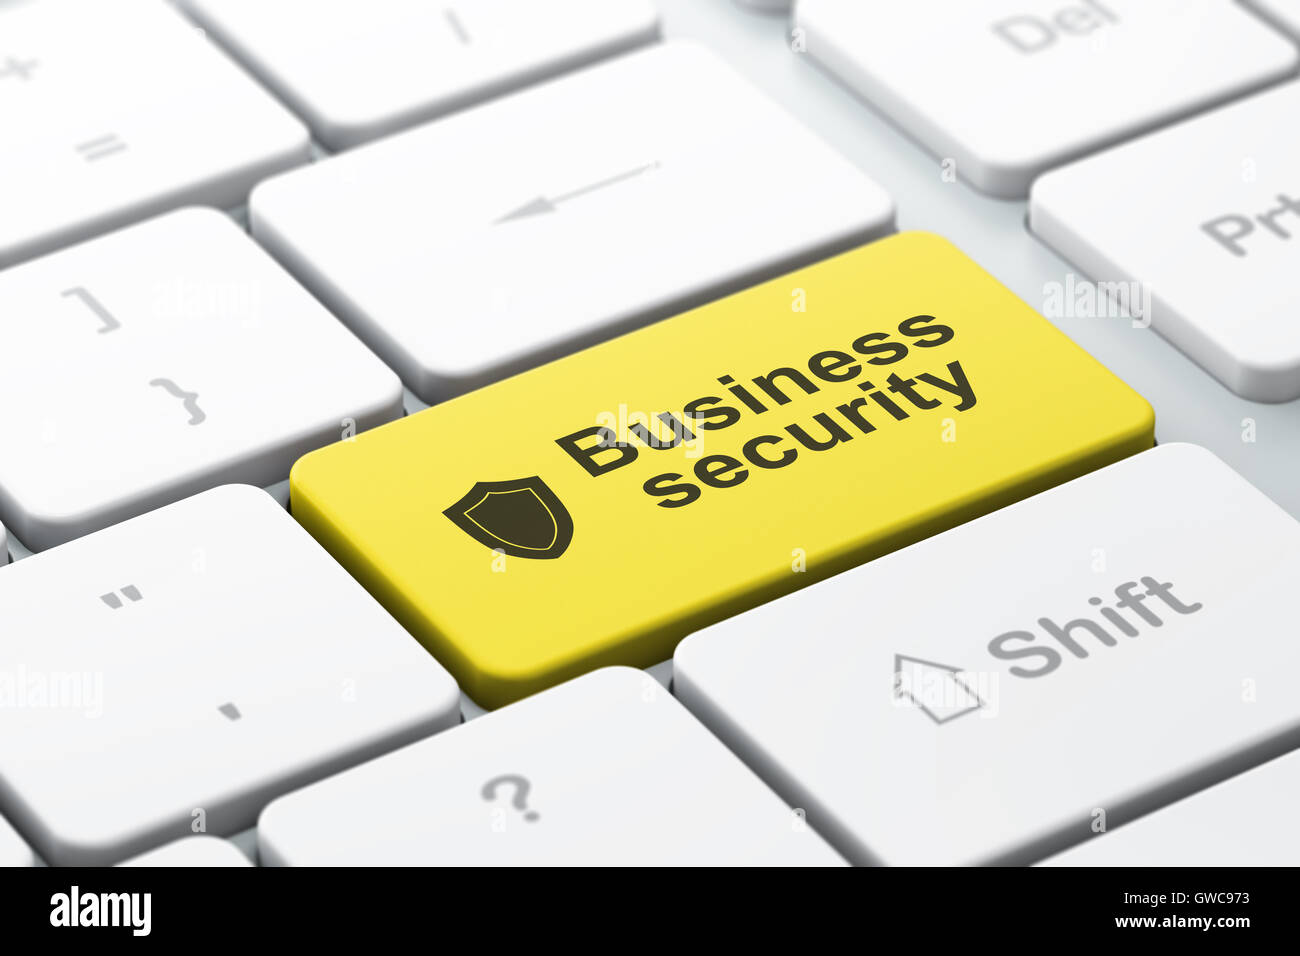 Privacy concept: computer keyboard with Shield and Business Secu Stock Photo